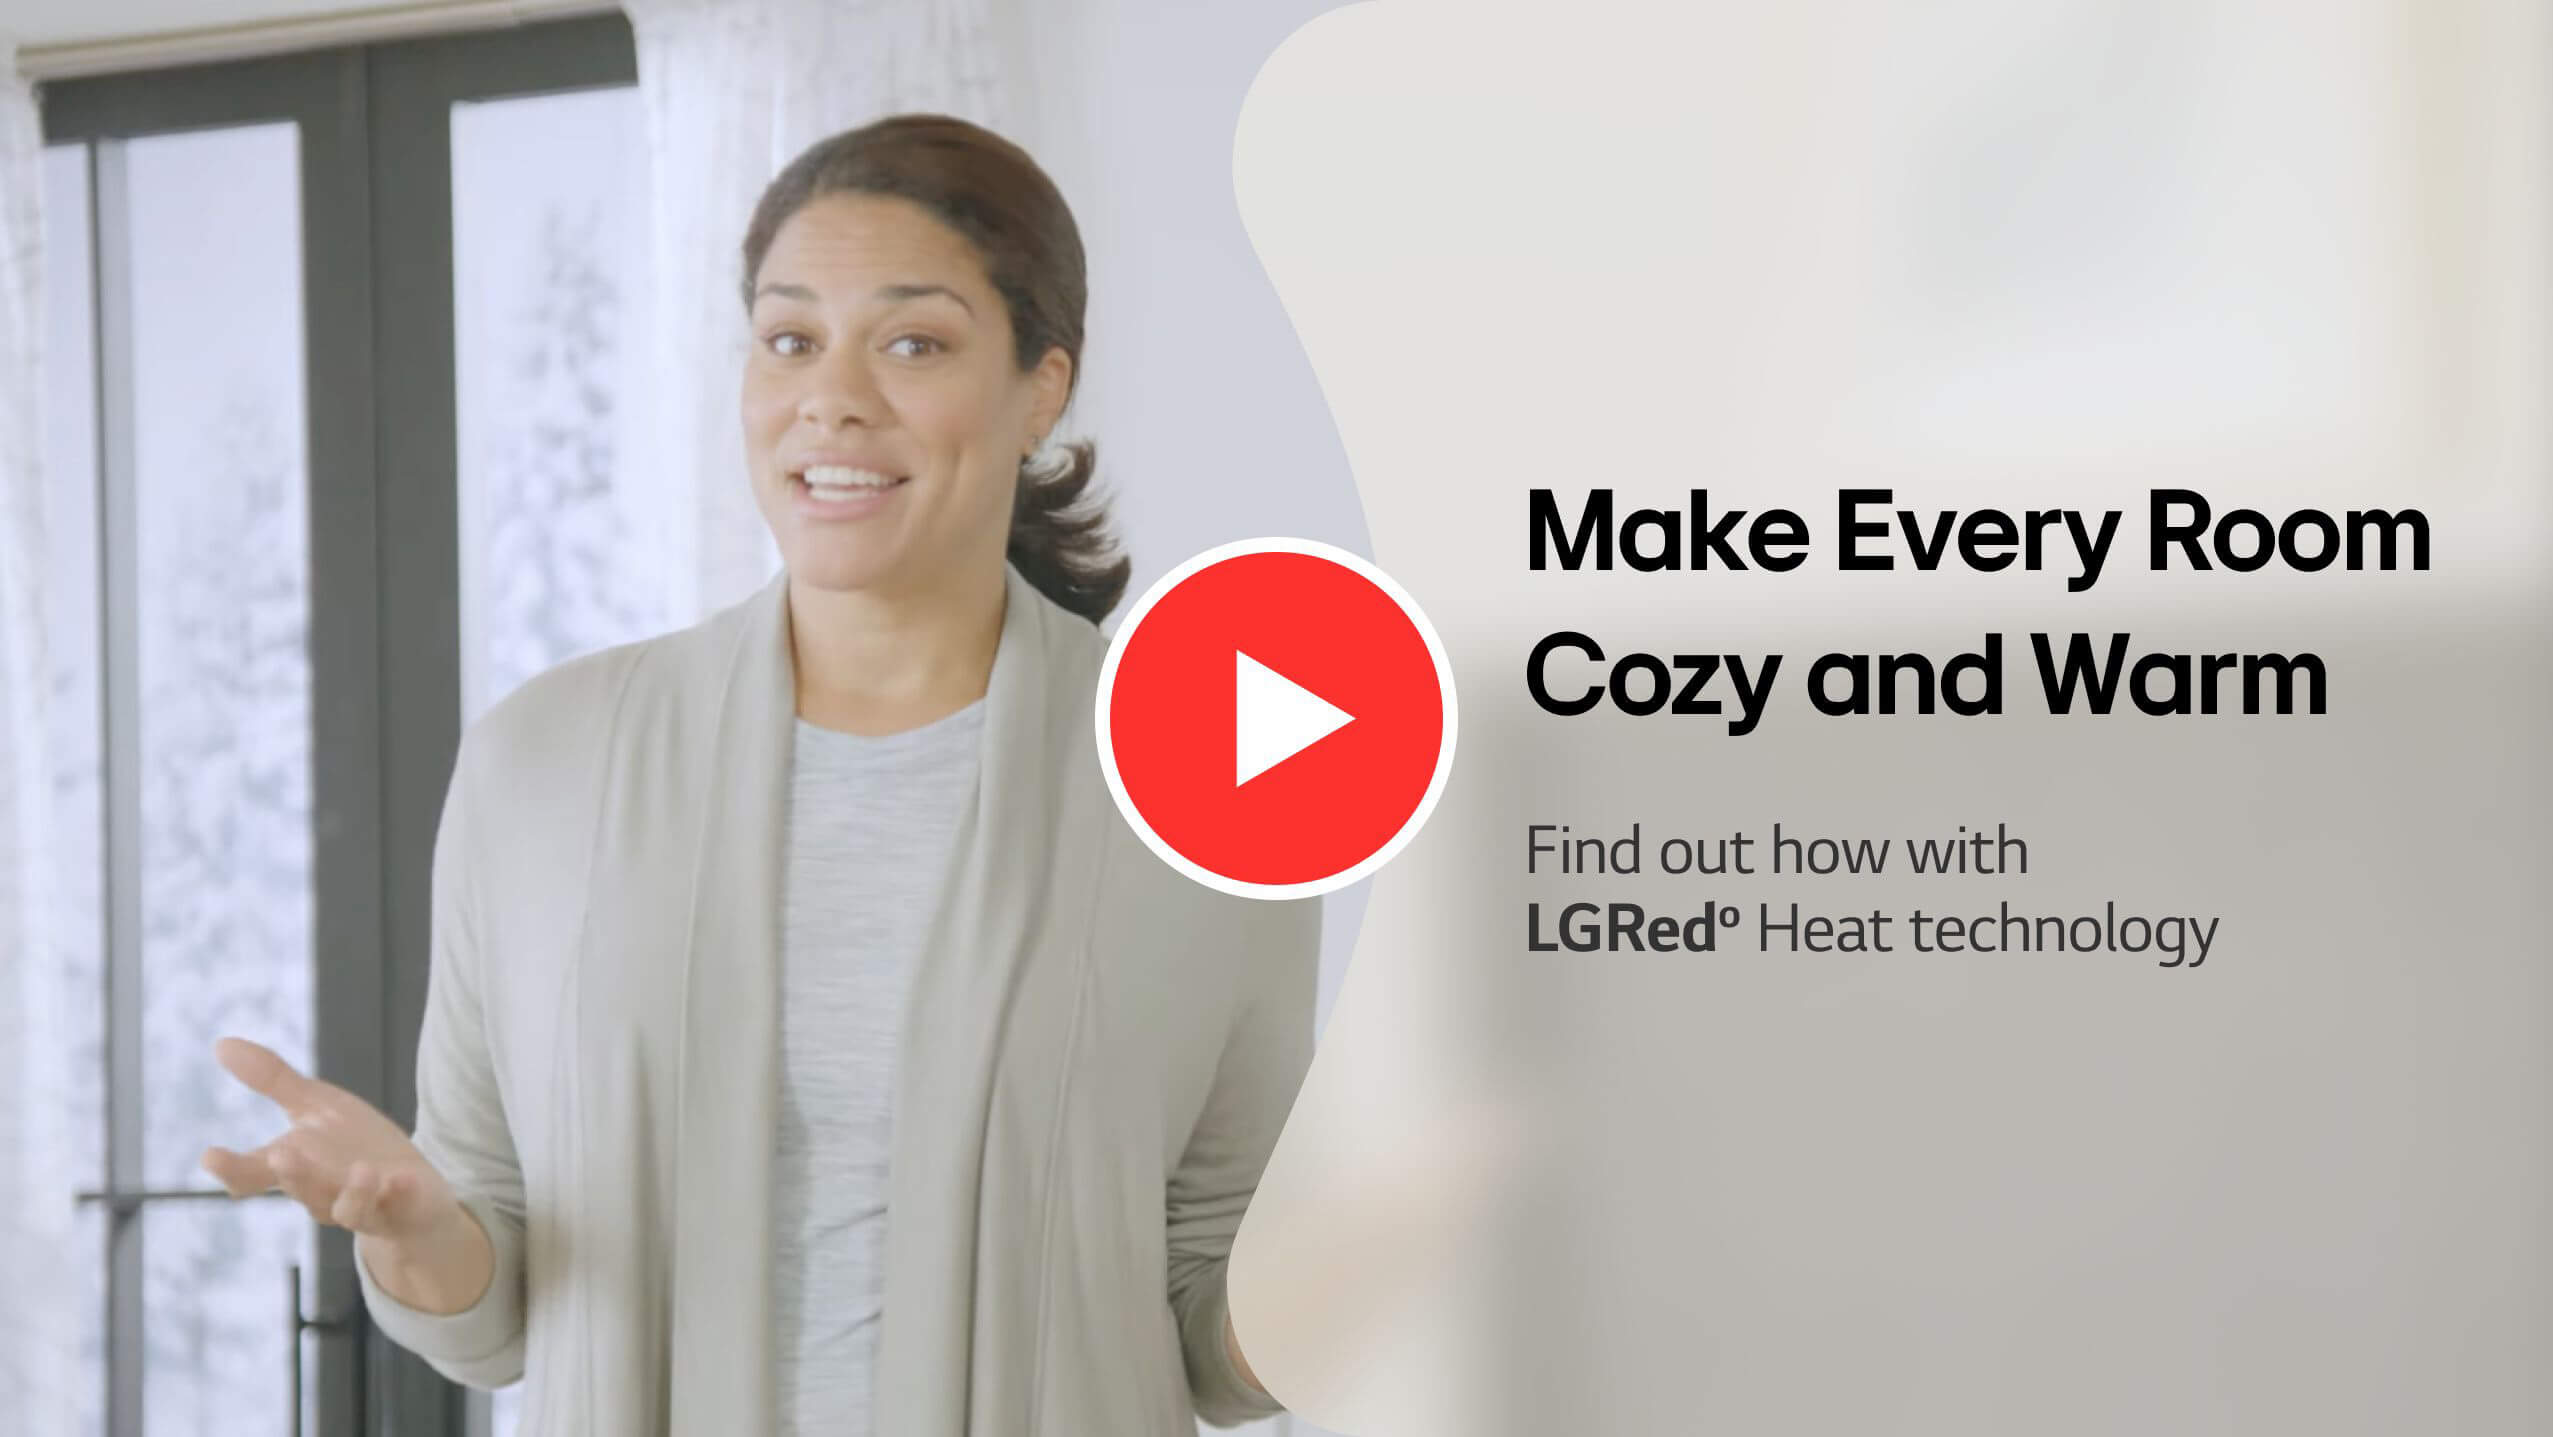 Make Every Room Cozy and Warm. Find out how with LGRed Heat technology.